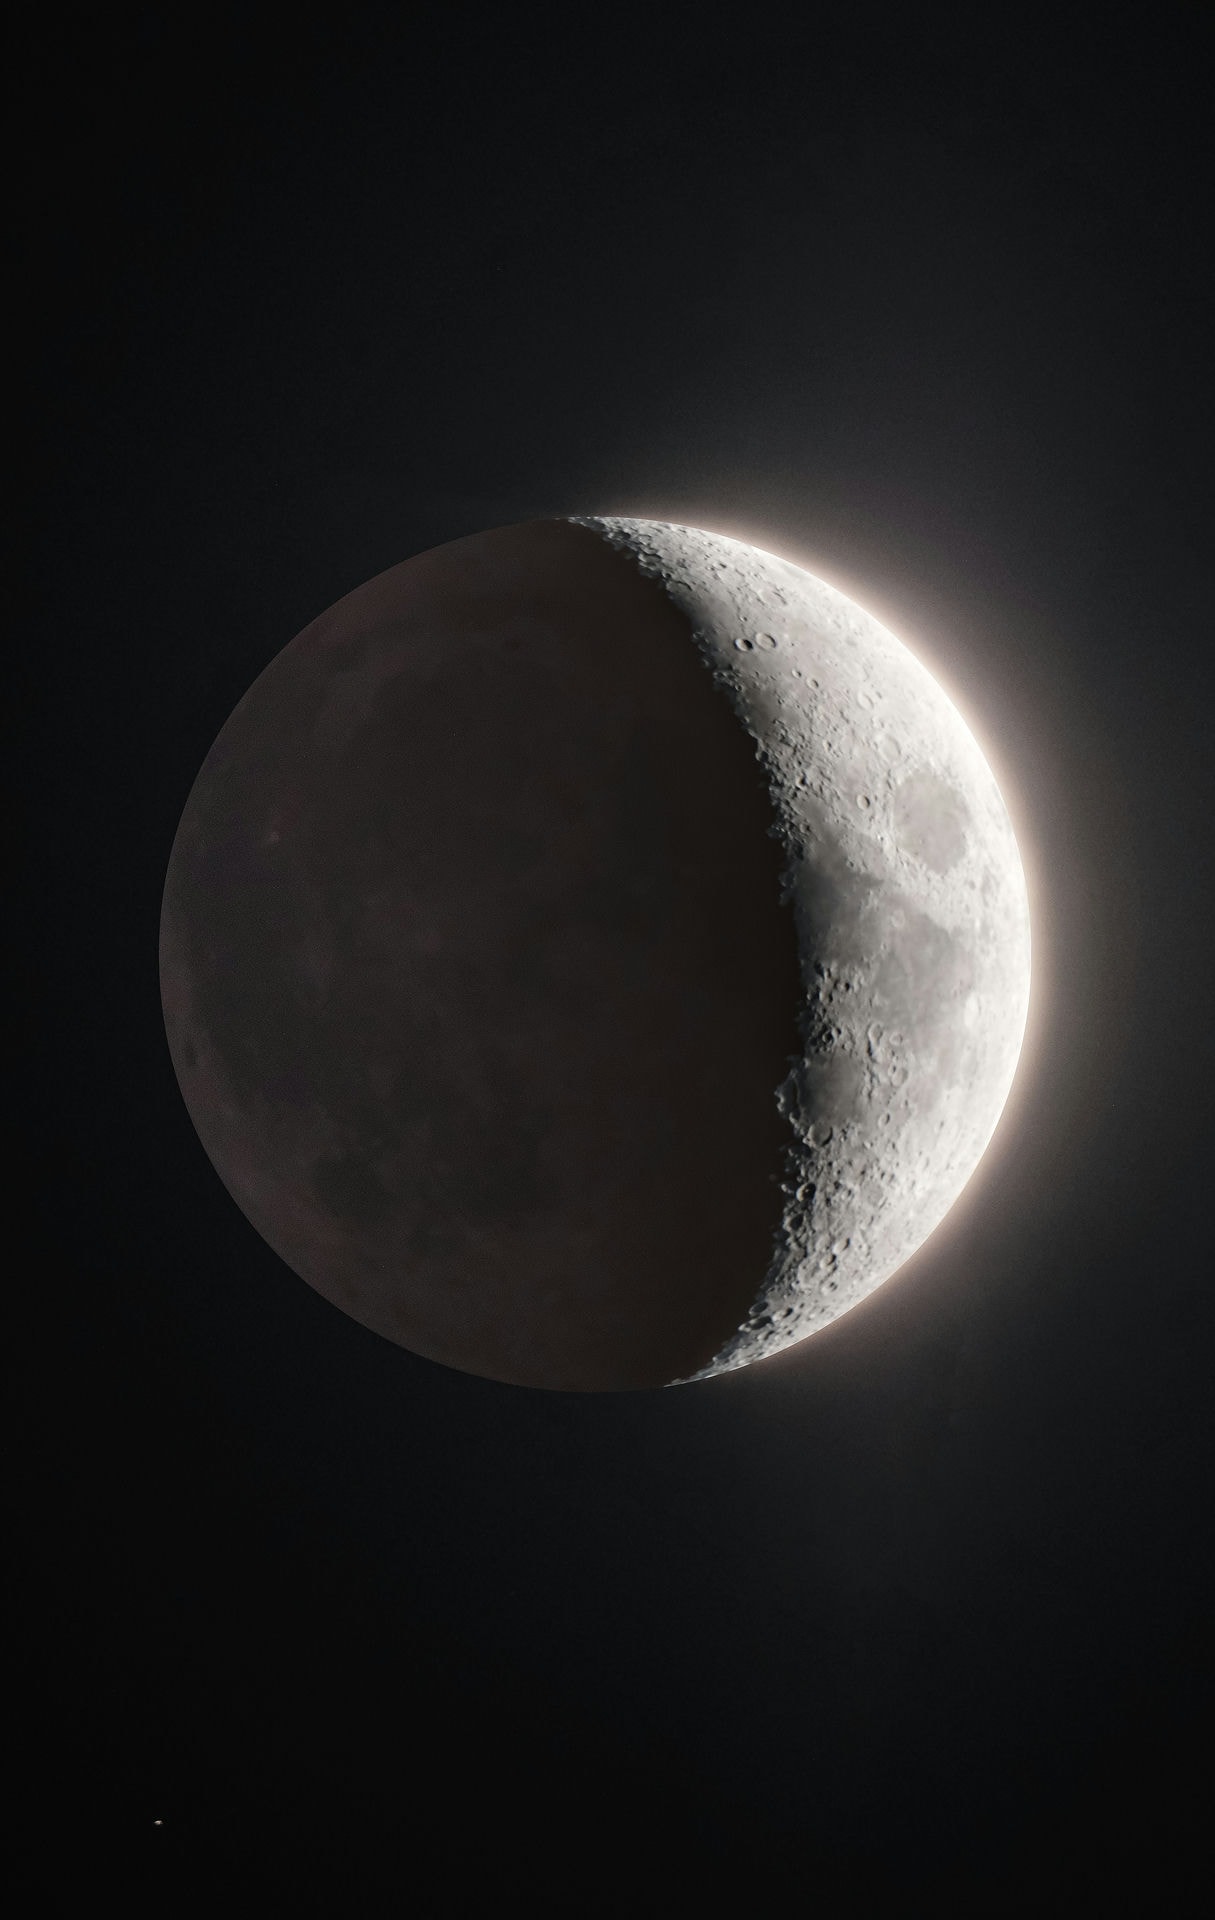 A Composite Image of the Moon